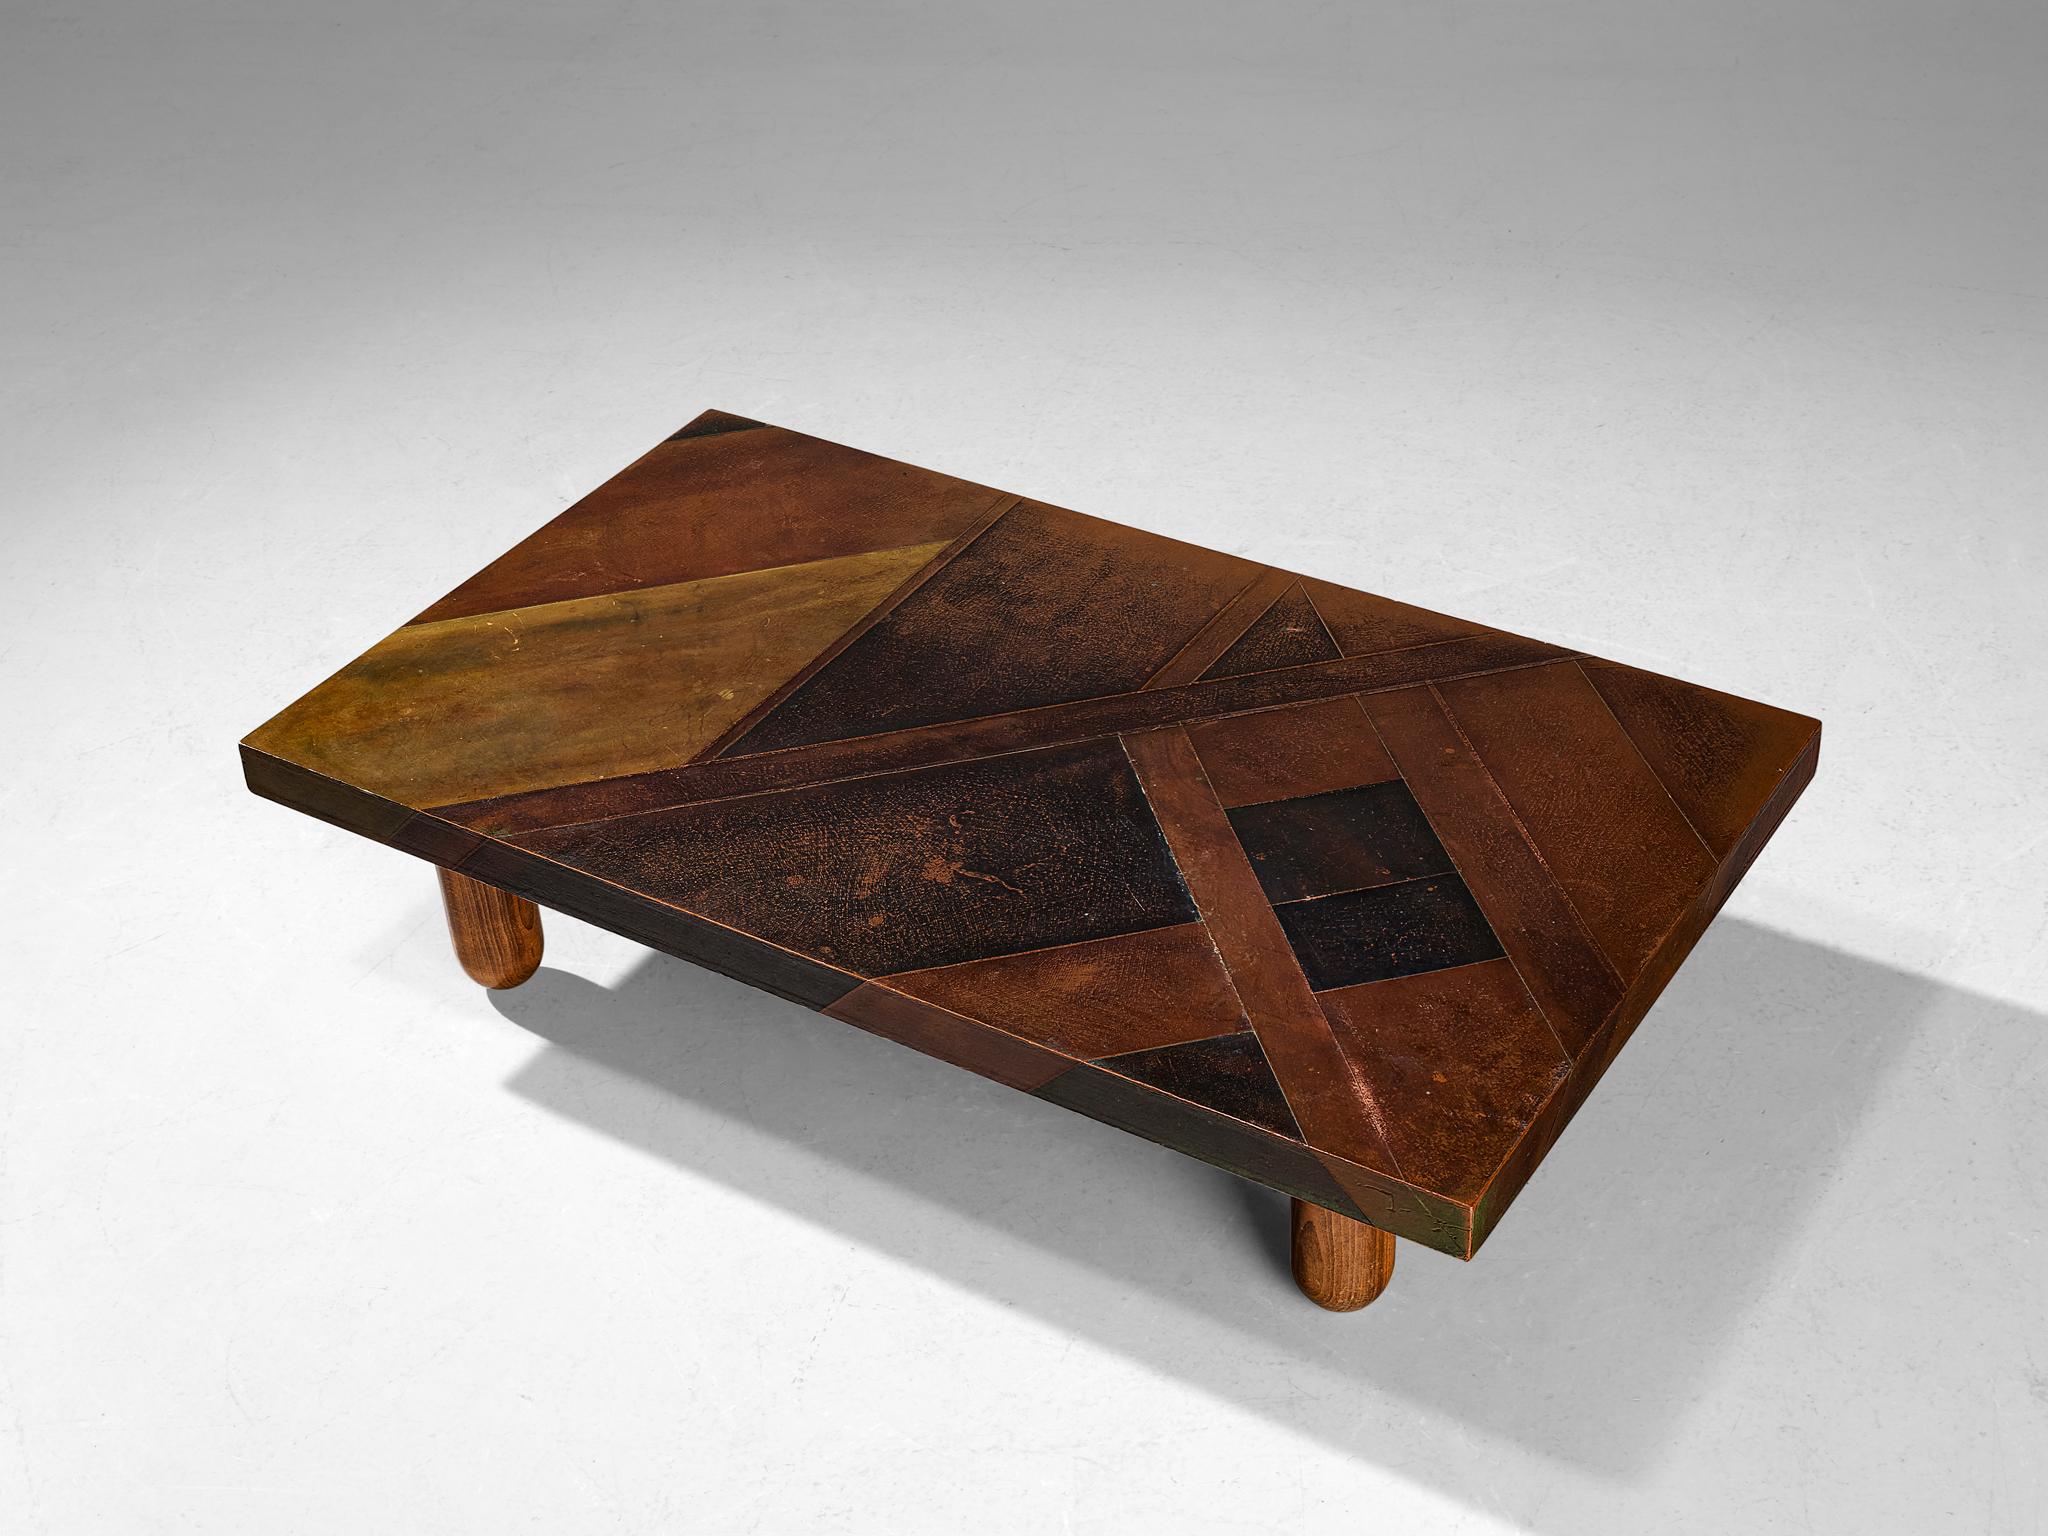 Lorenzo Burchiellaro, coffee table, copper and stained beech, Italy, 1960s.

This coffee table is an absolute eye-catcher. The copper is in beautiful, patinated condition and the vibrant yet natural oxidation and golden color is something out of